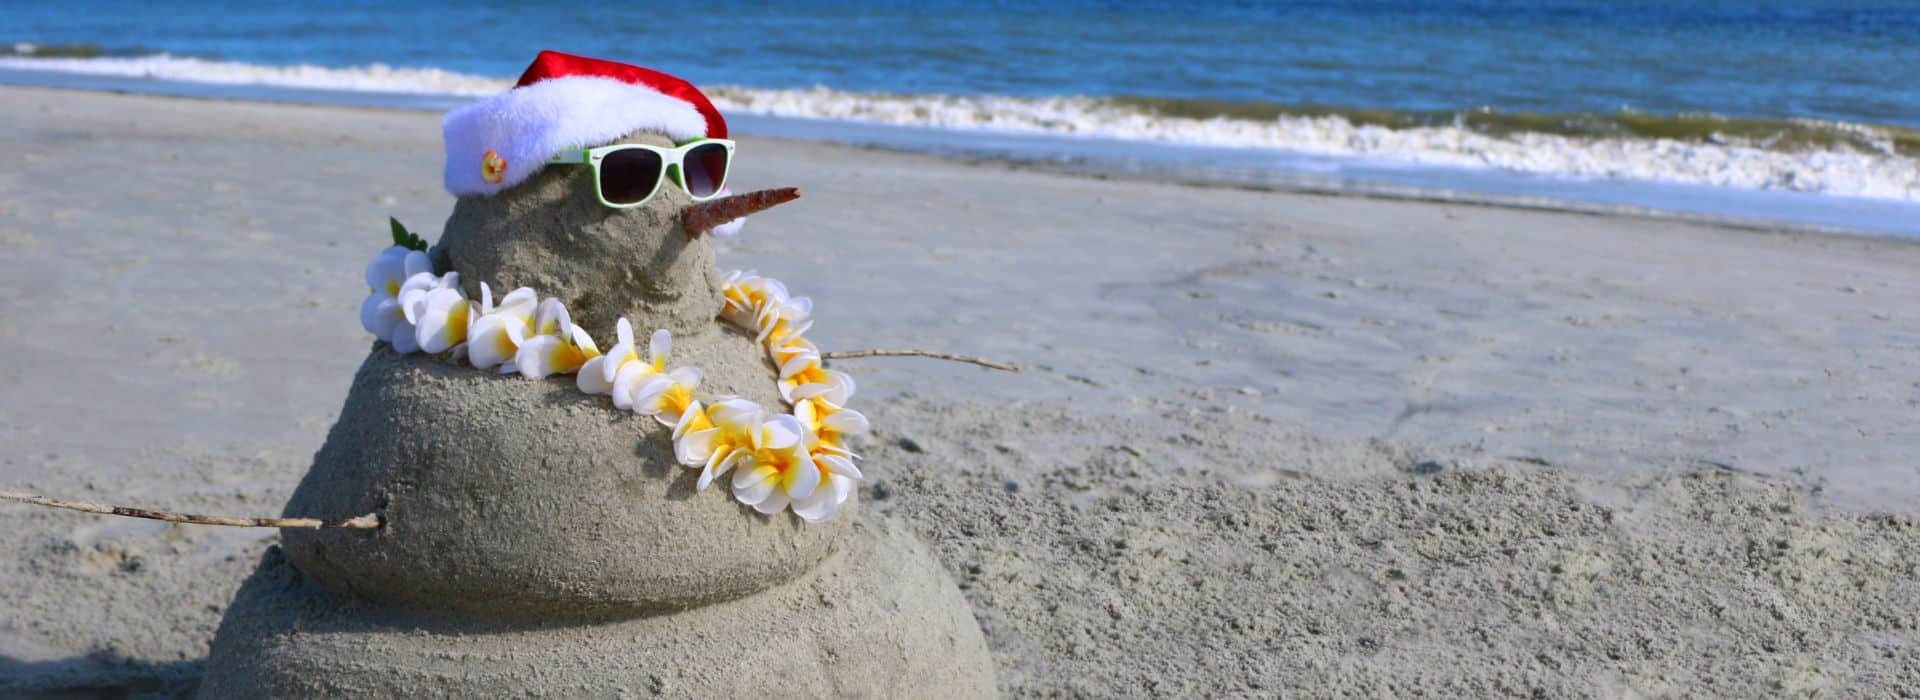 Snowman made of sand topped with a Santa hat and lei, the ocean in the background